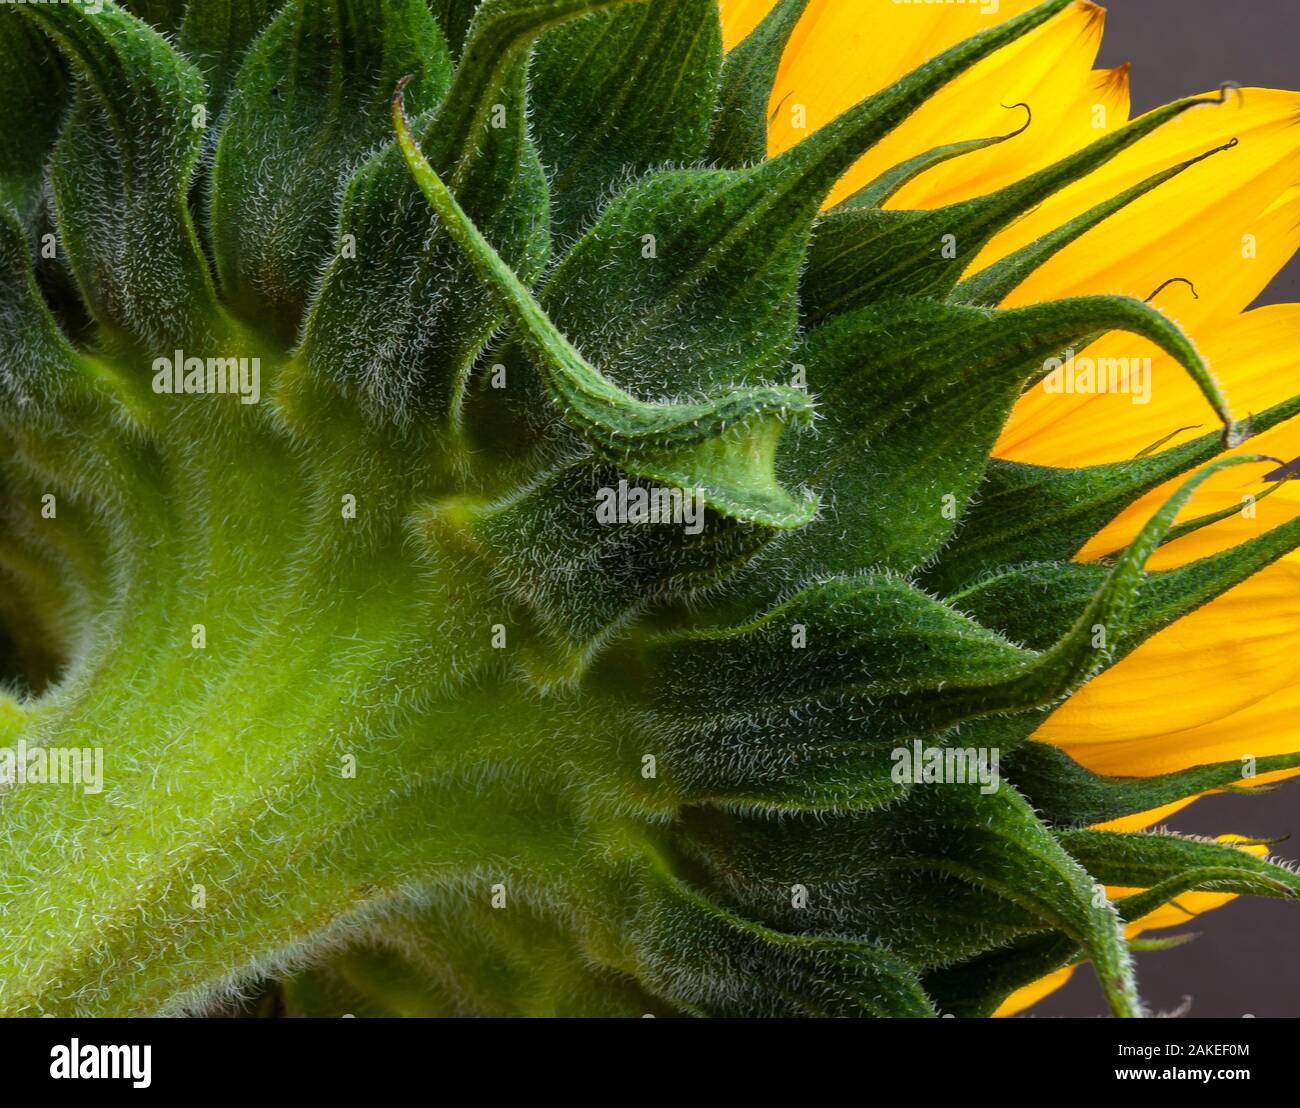 The rear of a sunflower. Stock Photo